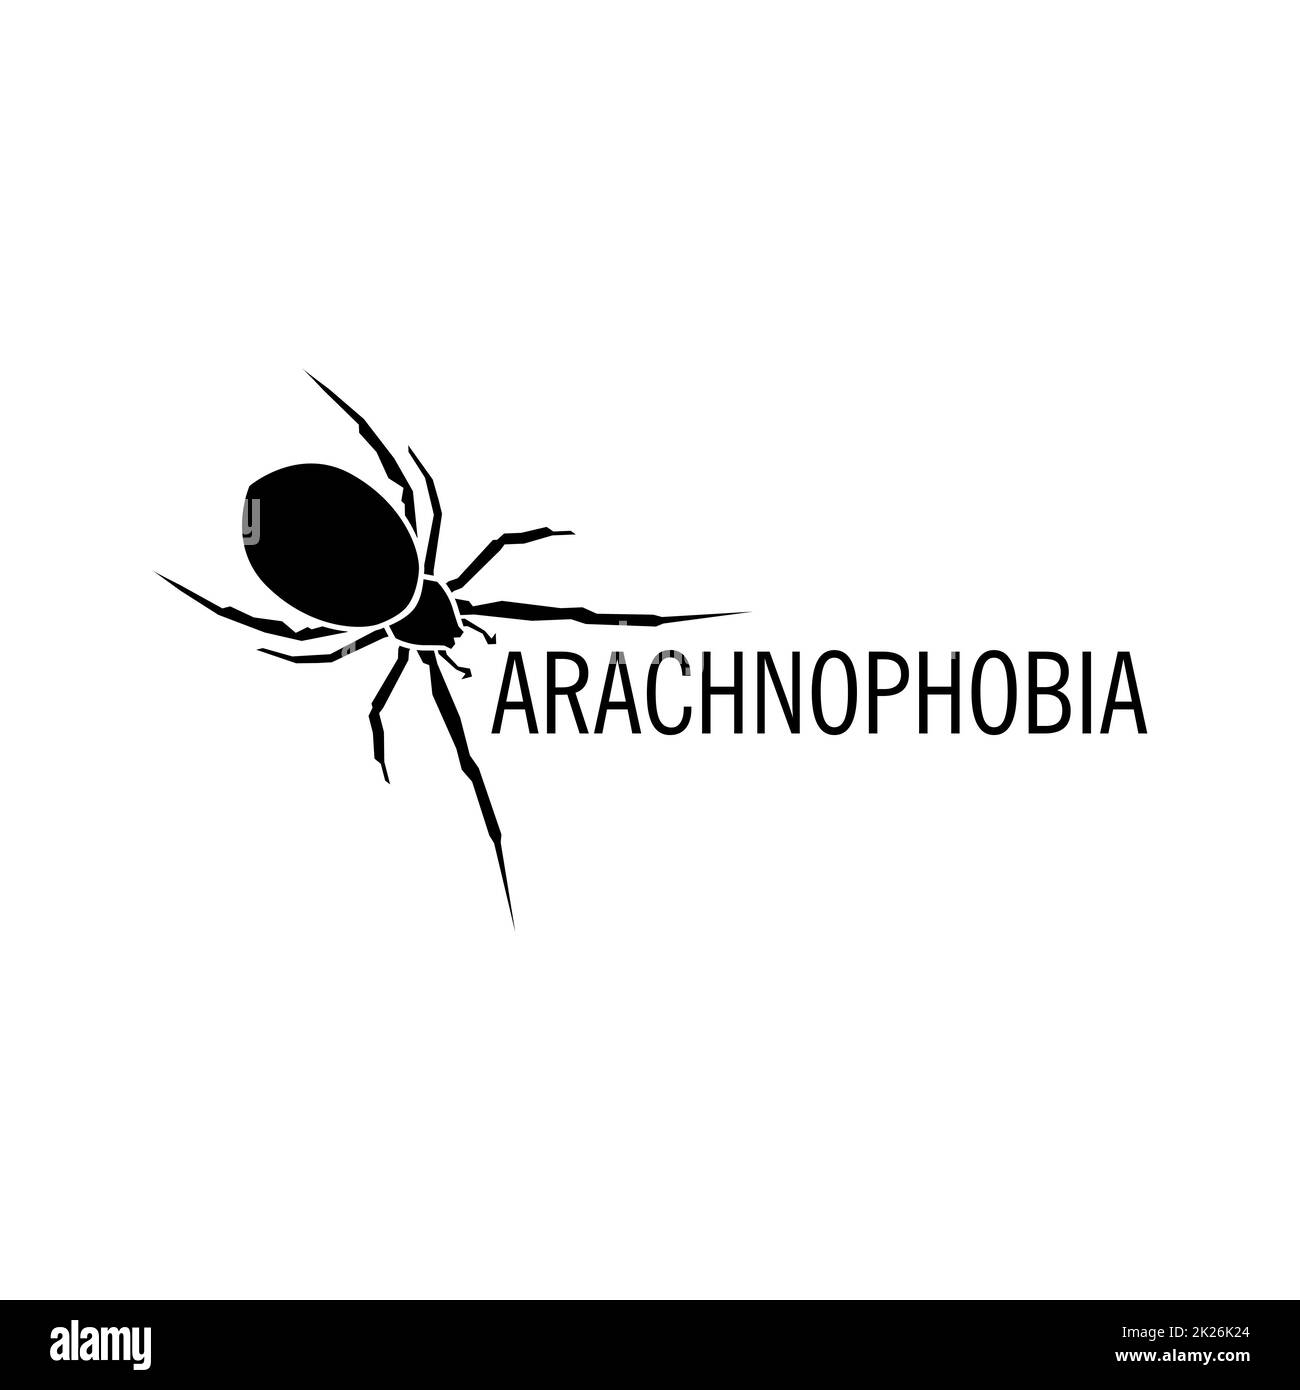 Poisonous spiders Black and White Stock Photos & Images - Alamy